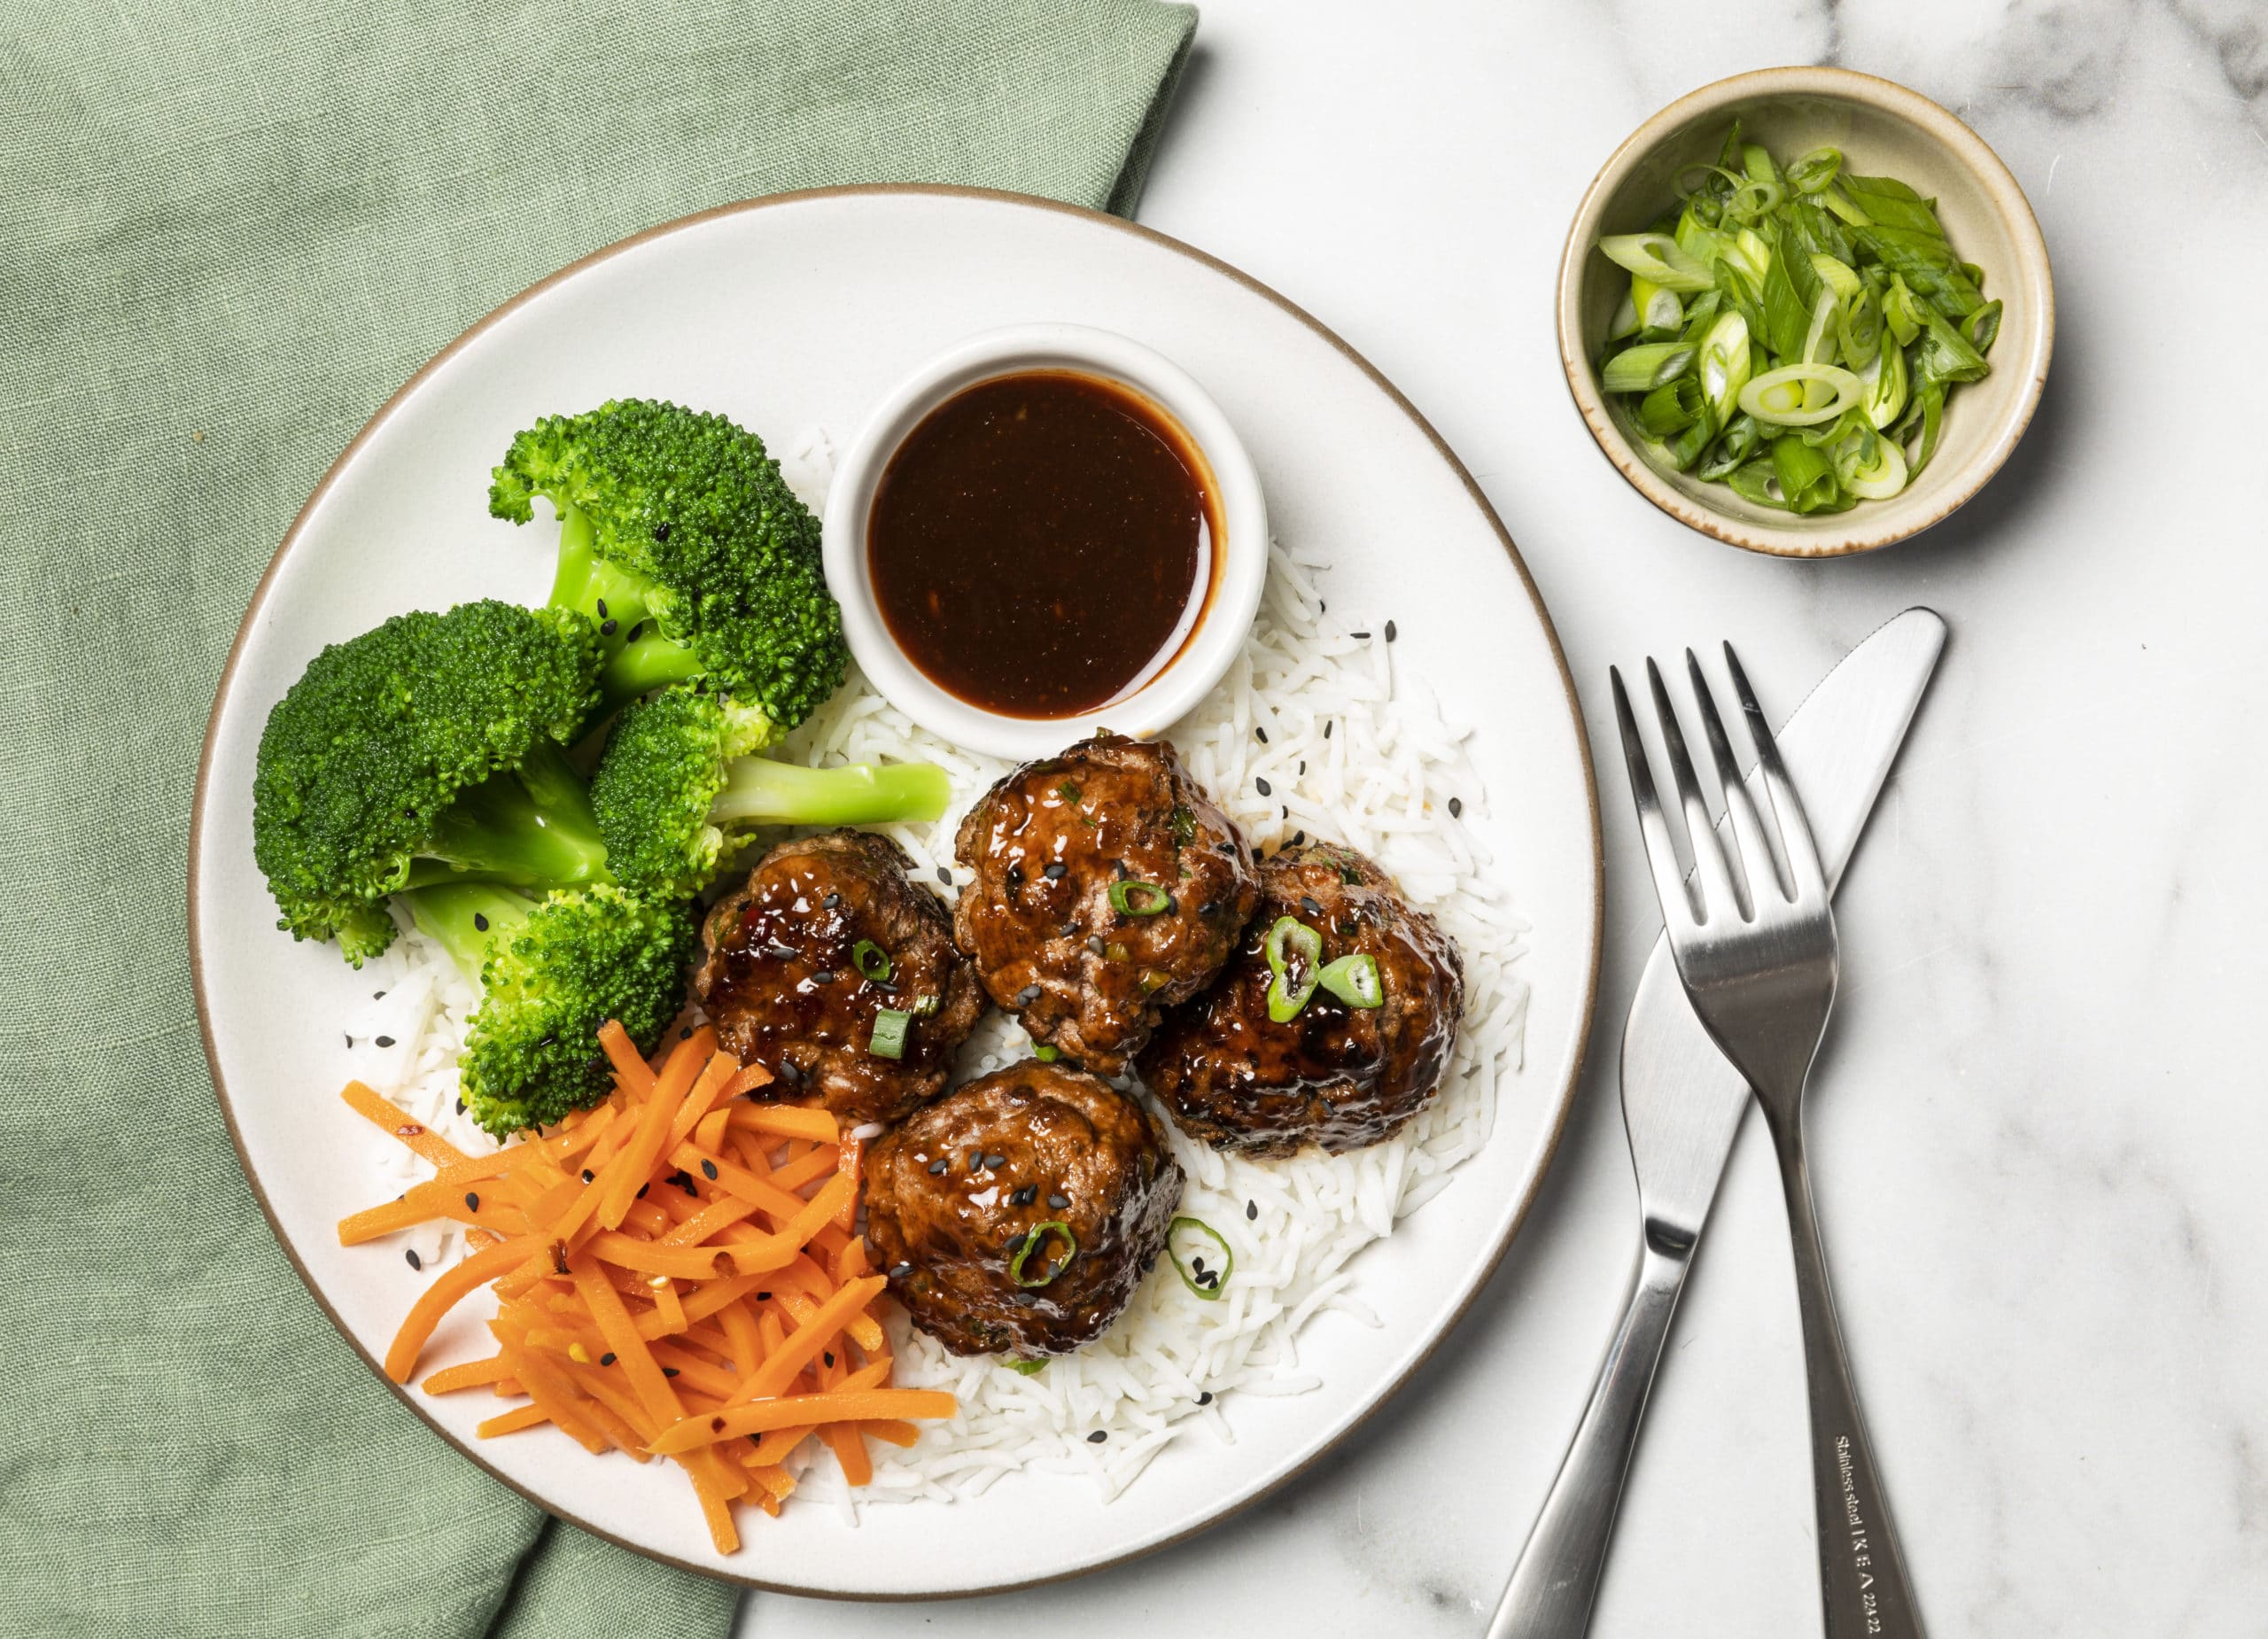 A plate of Korean meatballs with broccoli and carrots